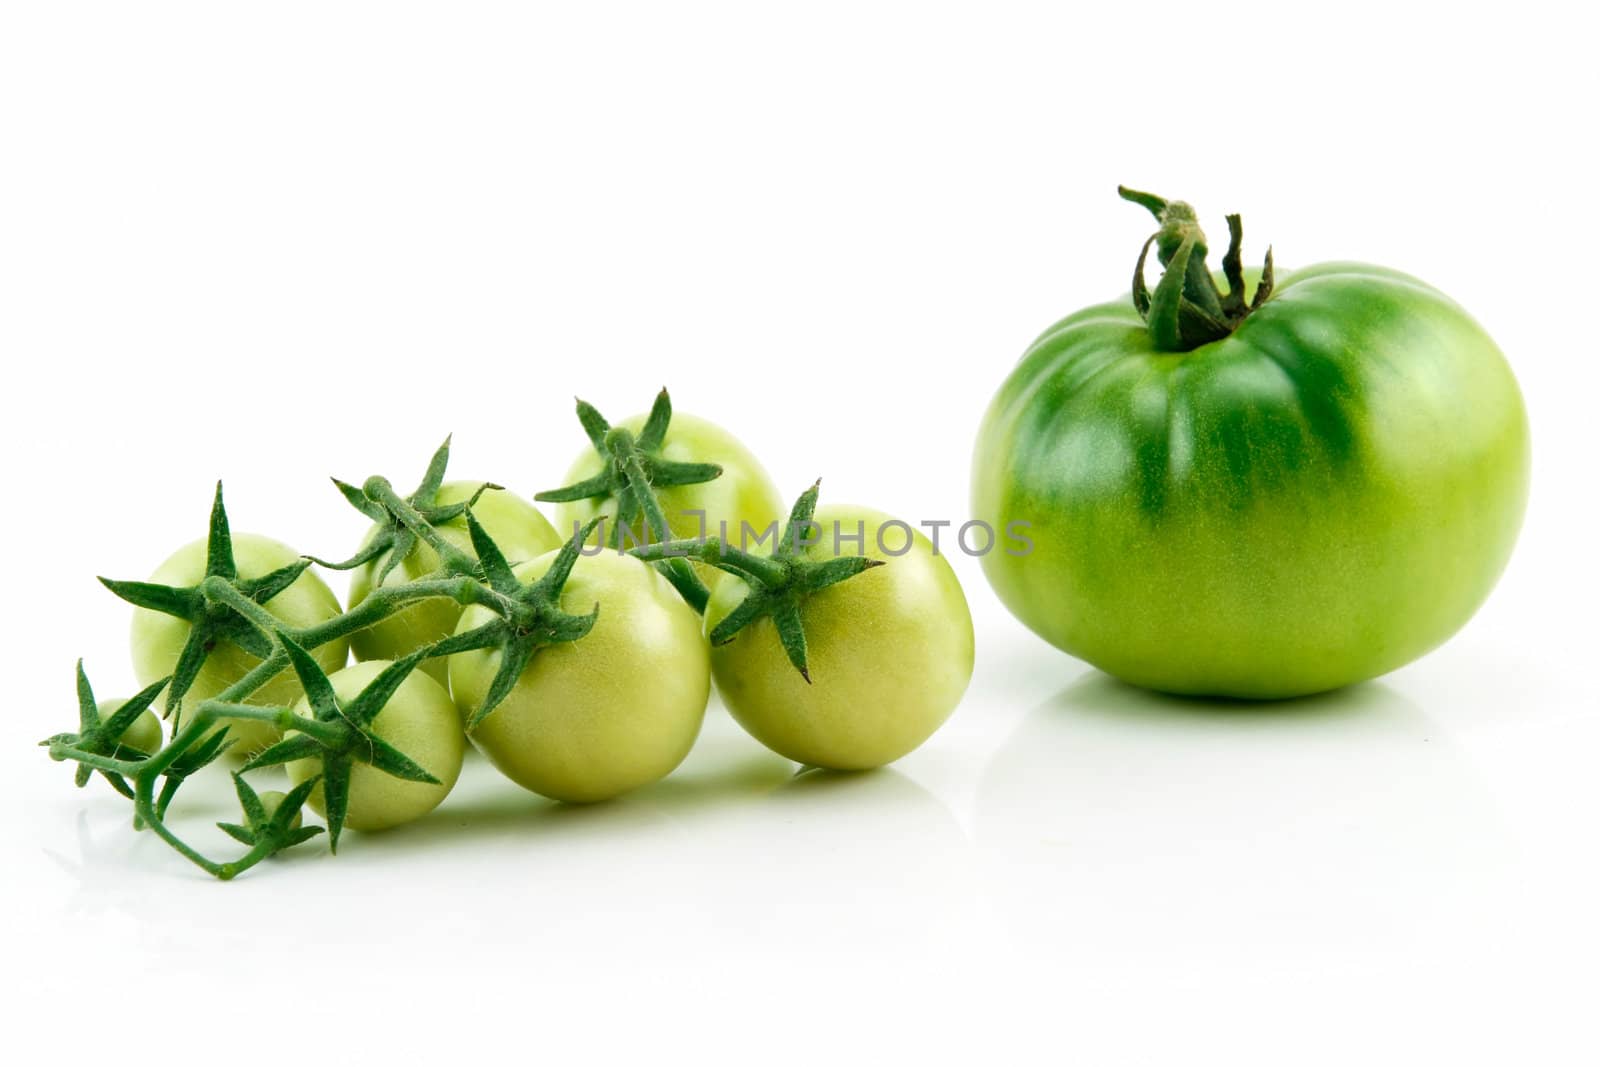 Bunch of Ripe Yellow and Green Tomatoes Isolated on White by alphacell